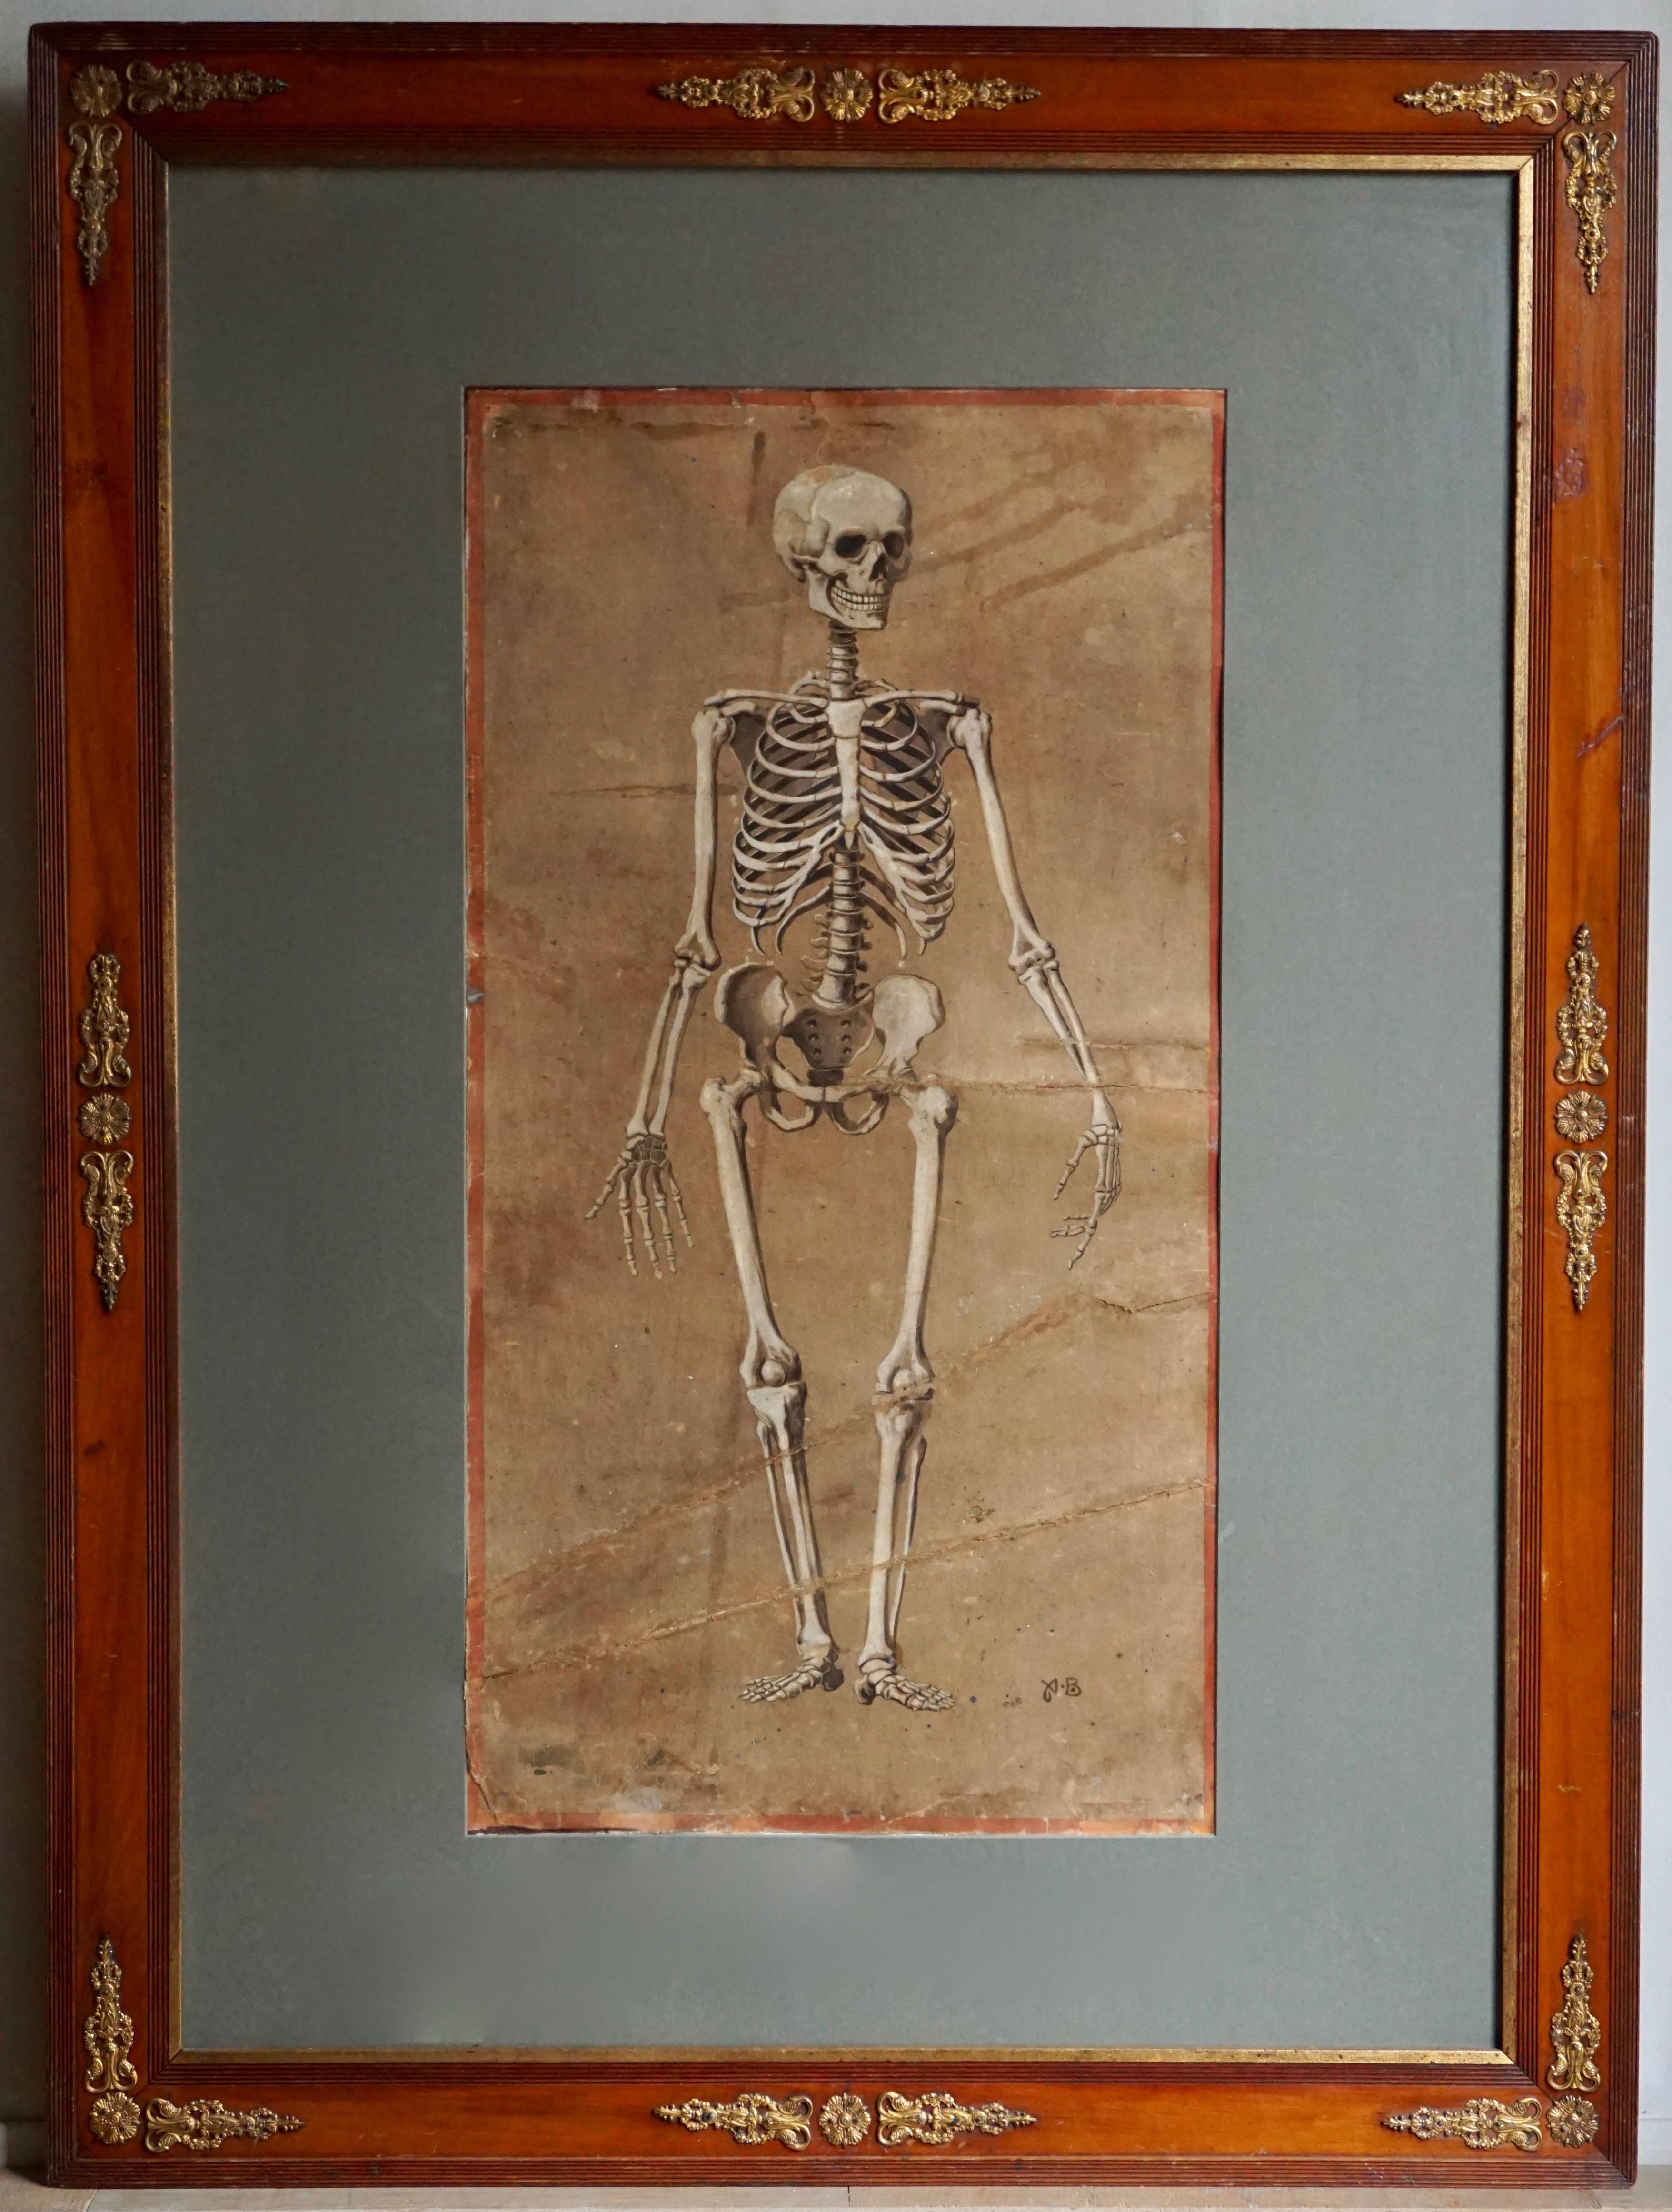 A spectacular and rare pair of watercolor on cardboard paintings representing a human skeleton from the front and from the back, surrounded by a red painted band.
Monogrammed: A.B., late 19th century.
Possibly due to their former use in a didactic